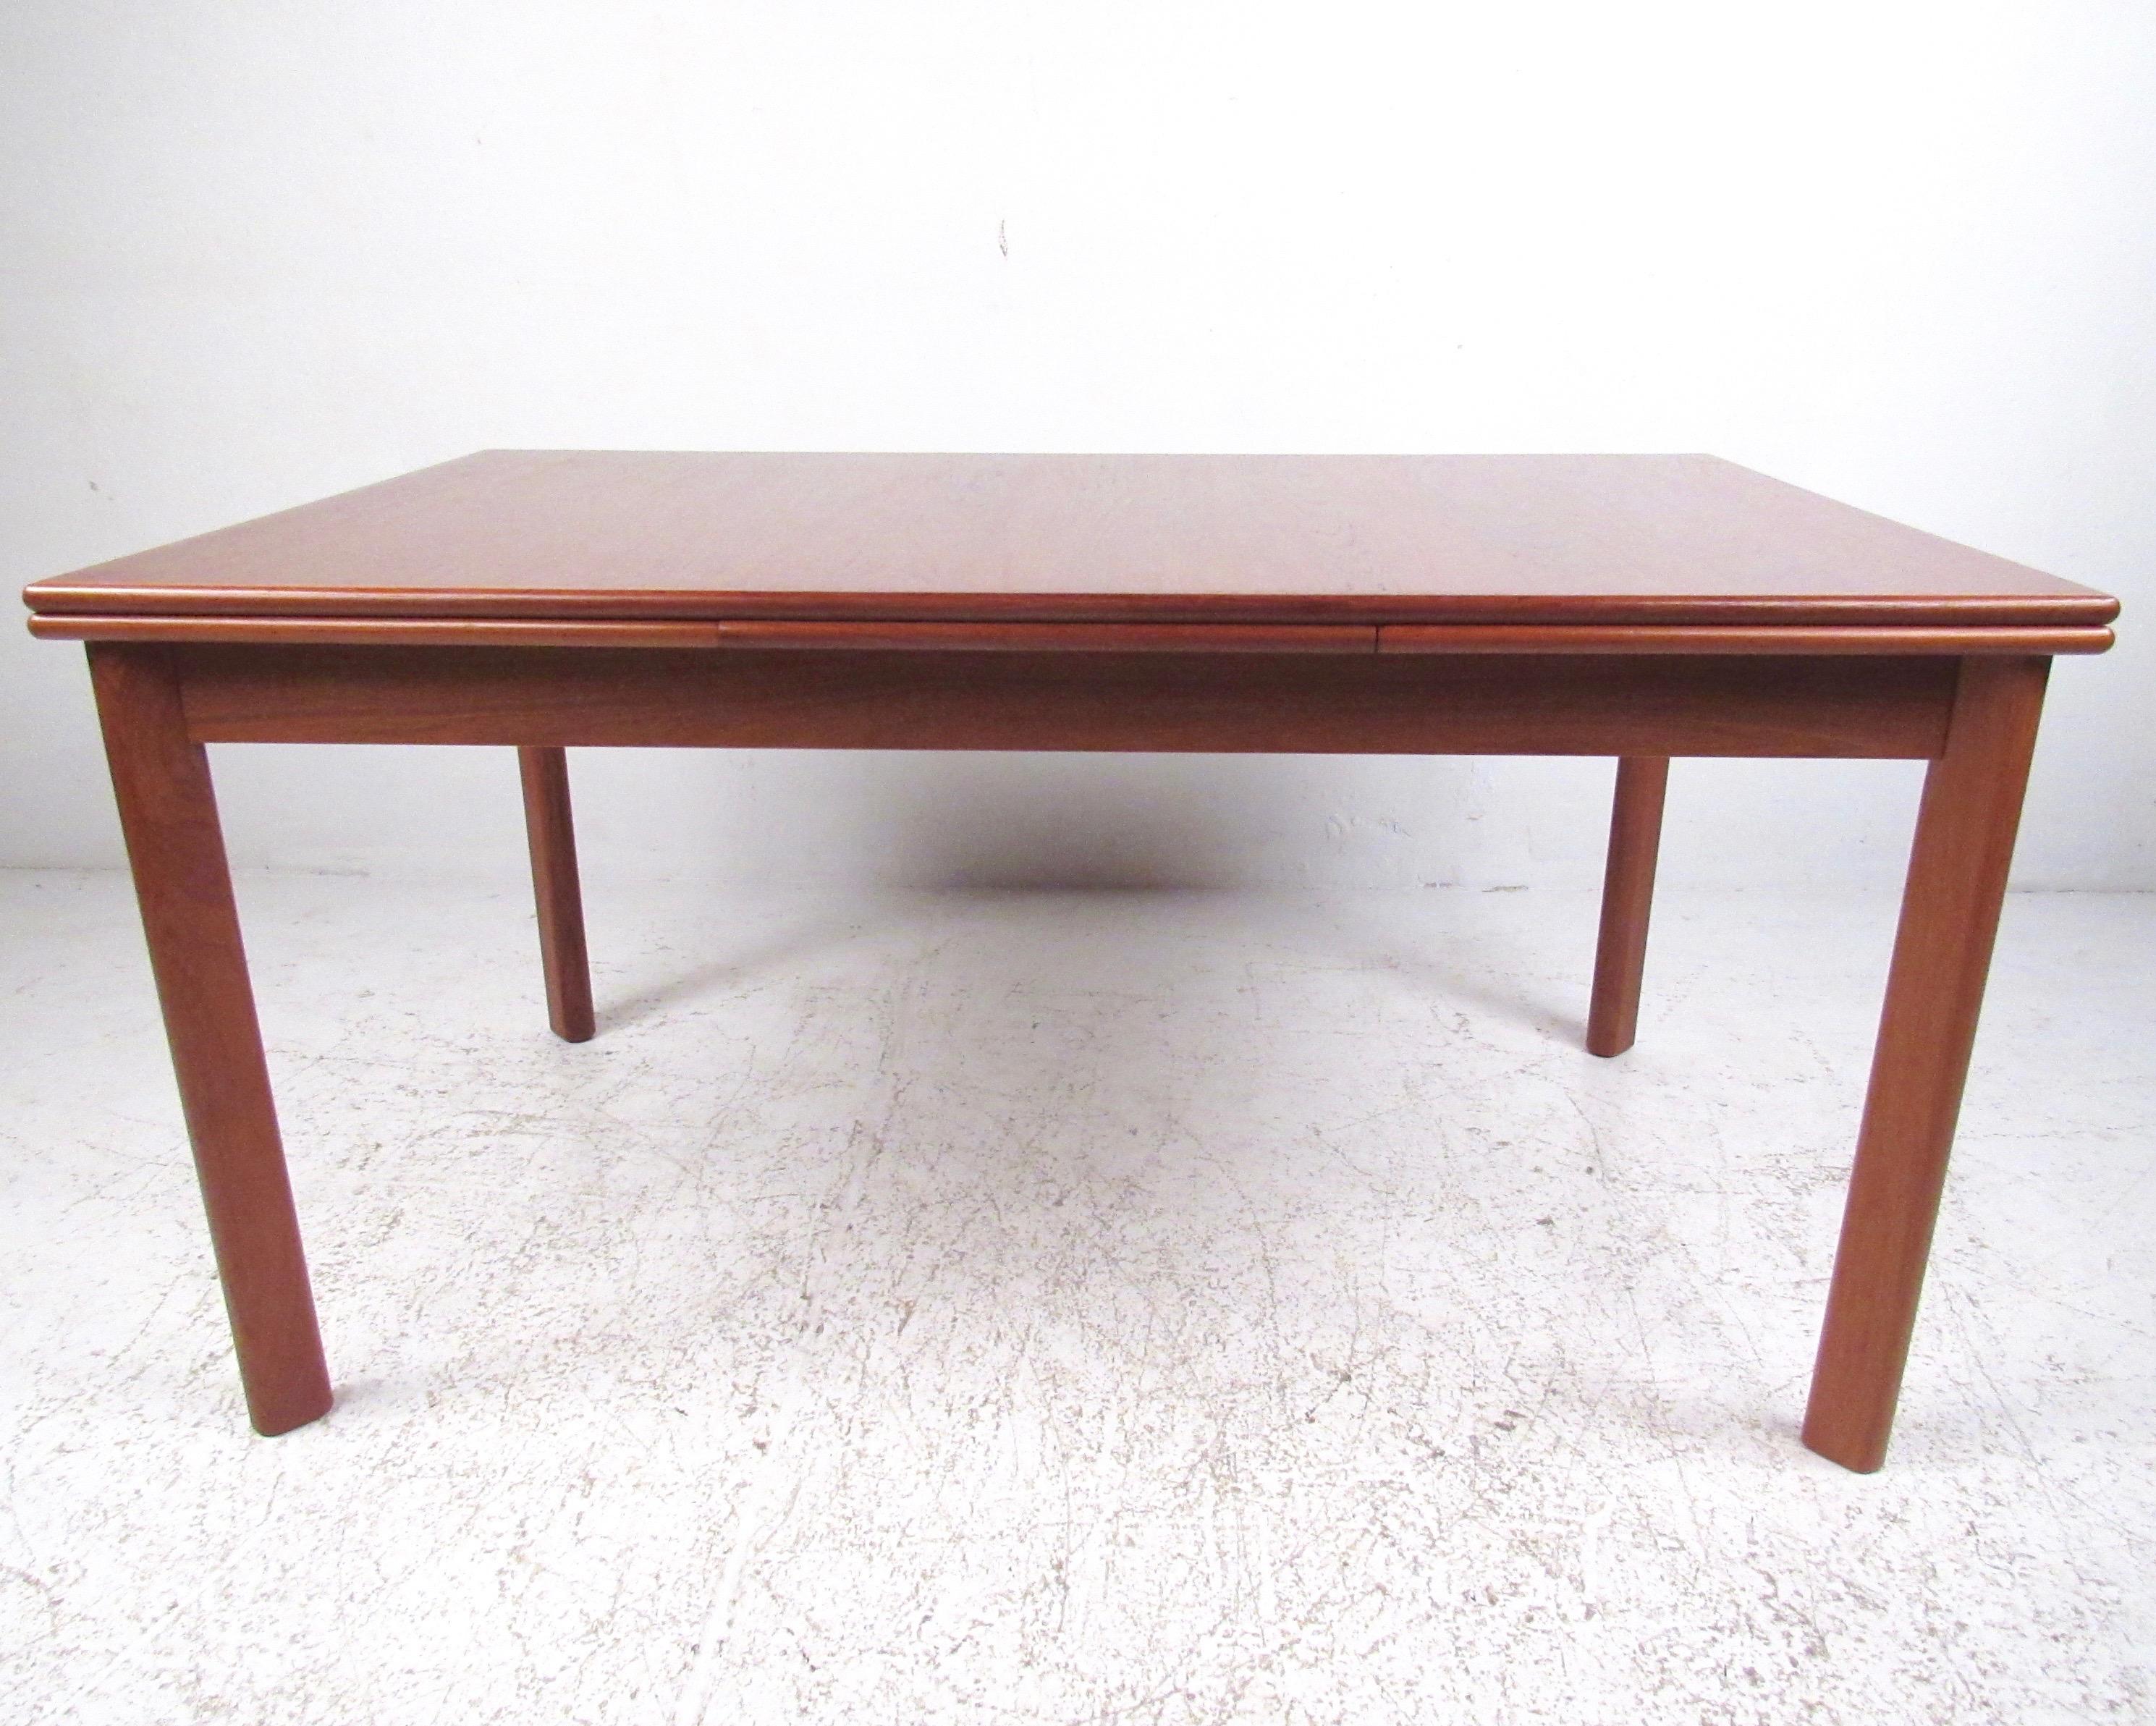 This Scandinavian Modern dining room table features pull-out draw leaves with vintage teak construction. Quality Mid-Century Modern manufacturing by Brdr. Furbo of Denmark, this striking vintage modern dining table makes a beautiful addition to a